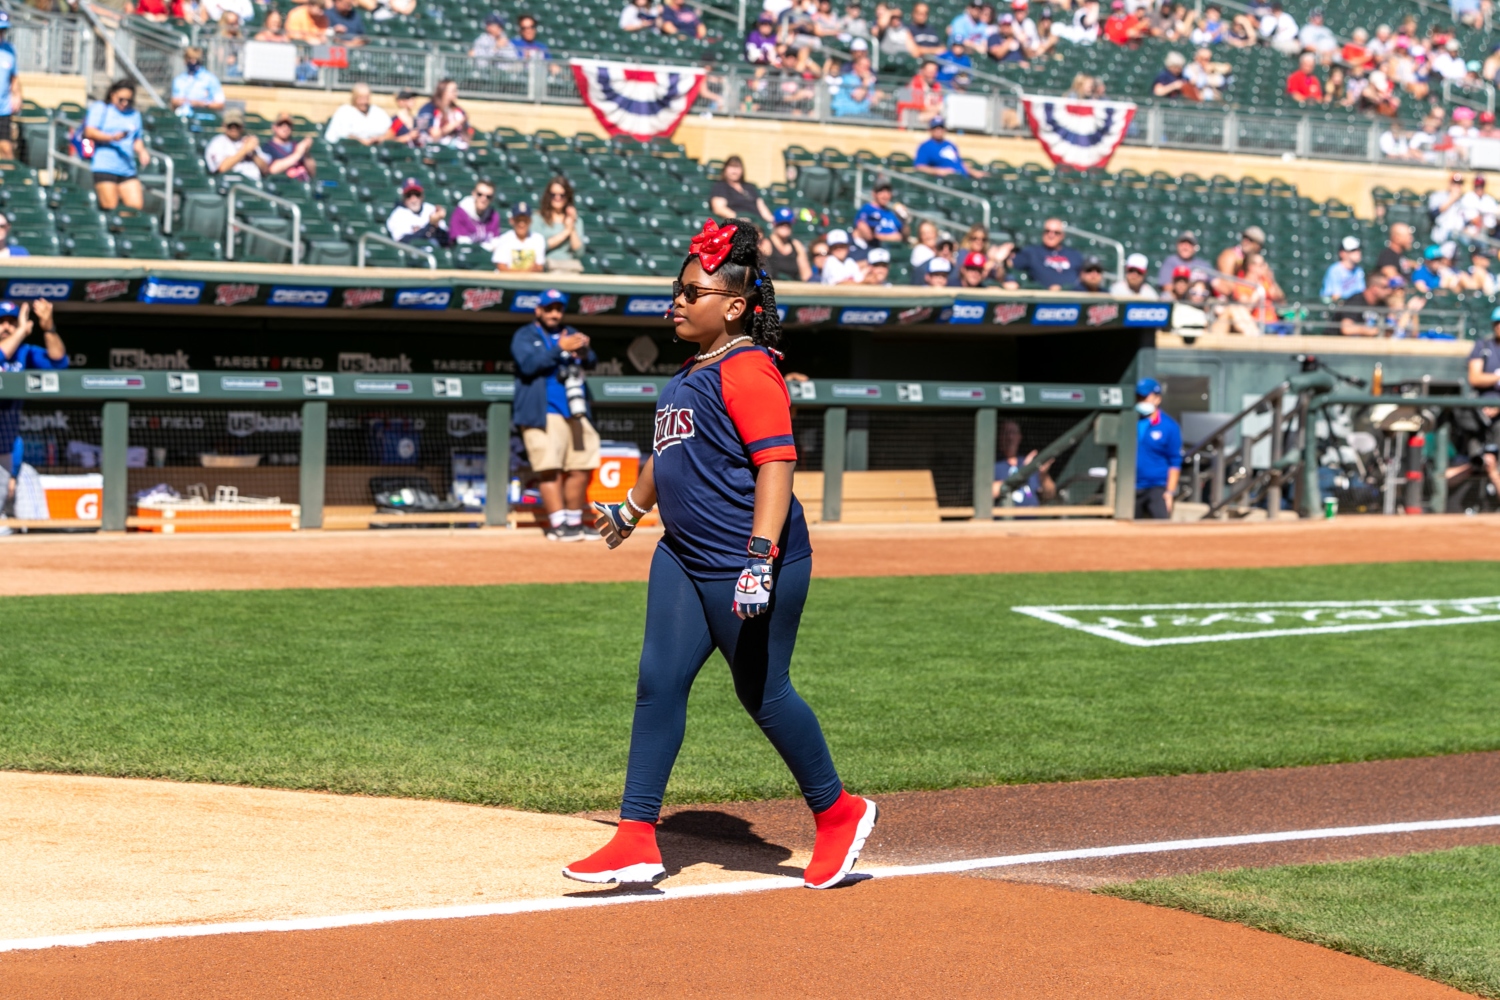 Z runs to home plate at Target Field